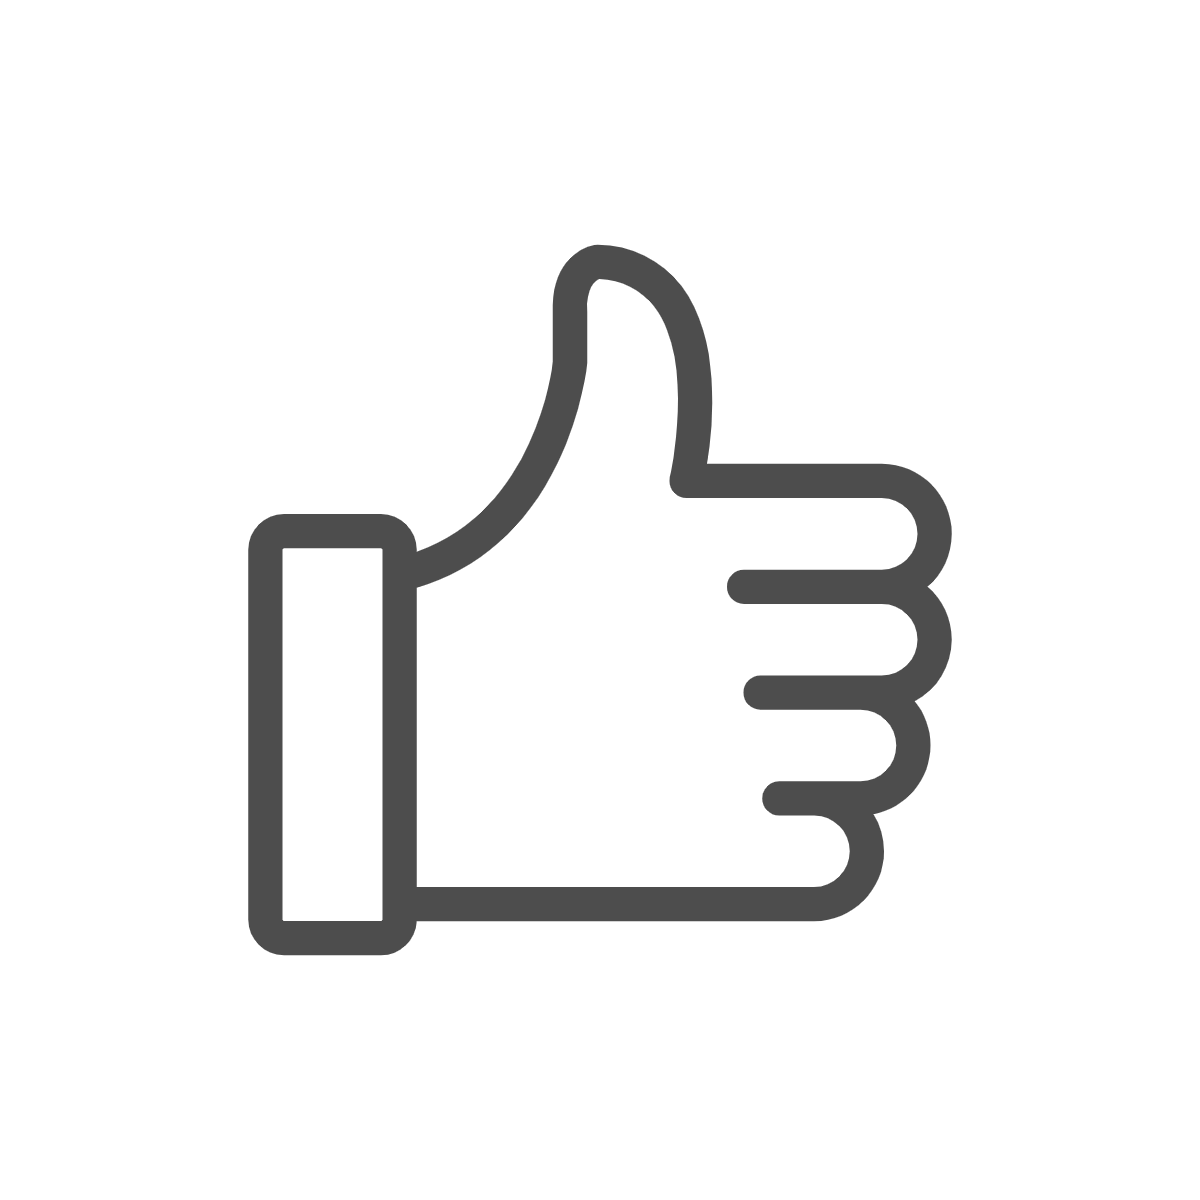 Thumbs up for good reviews from roof repair customers